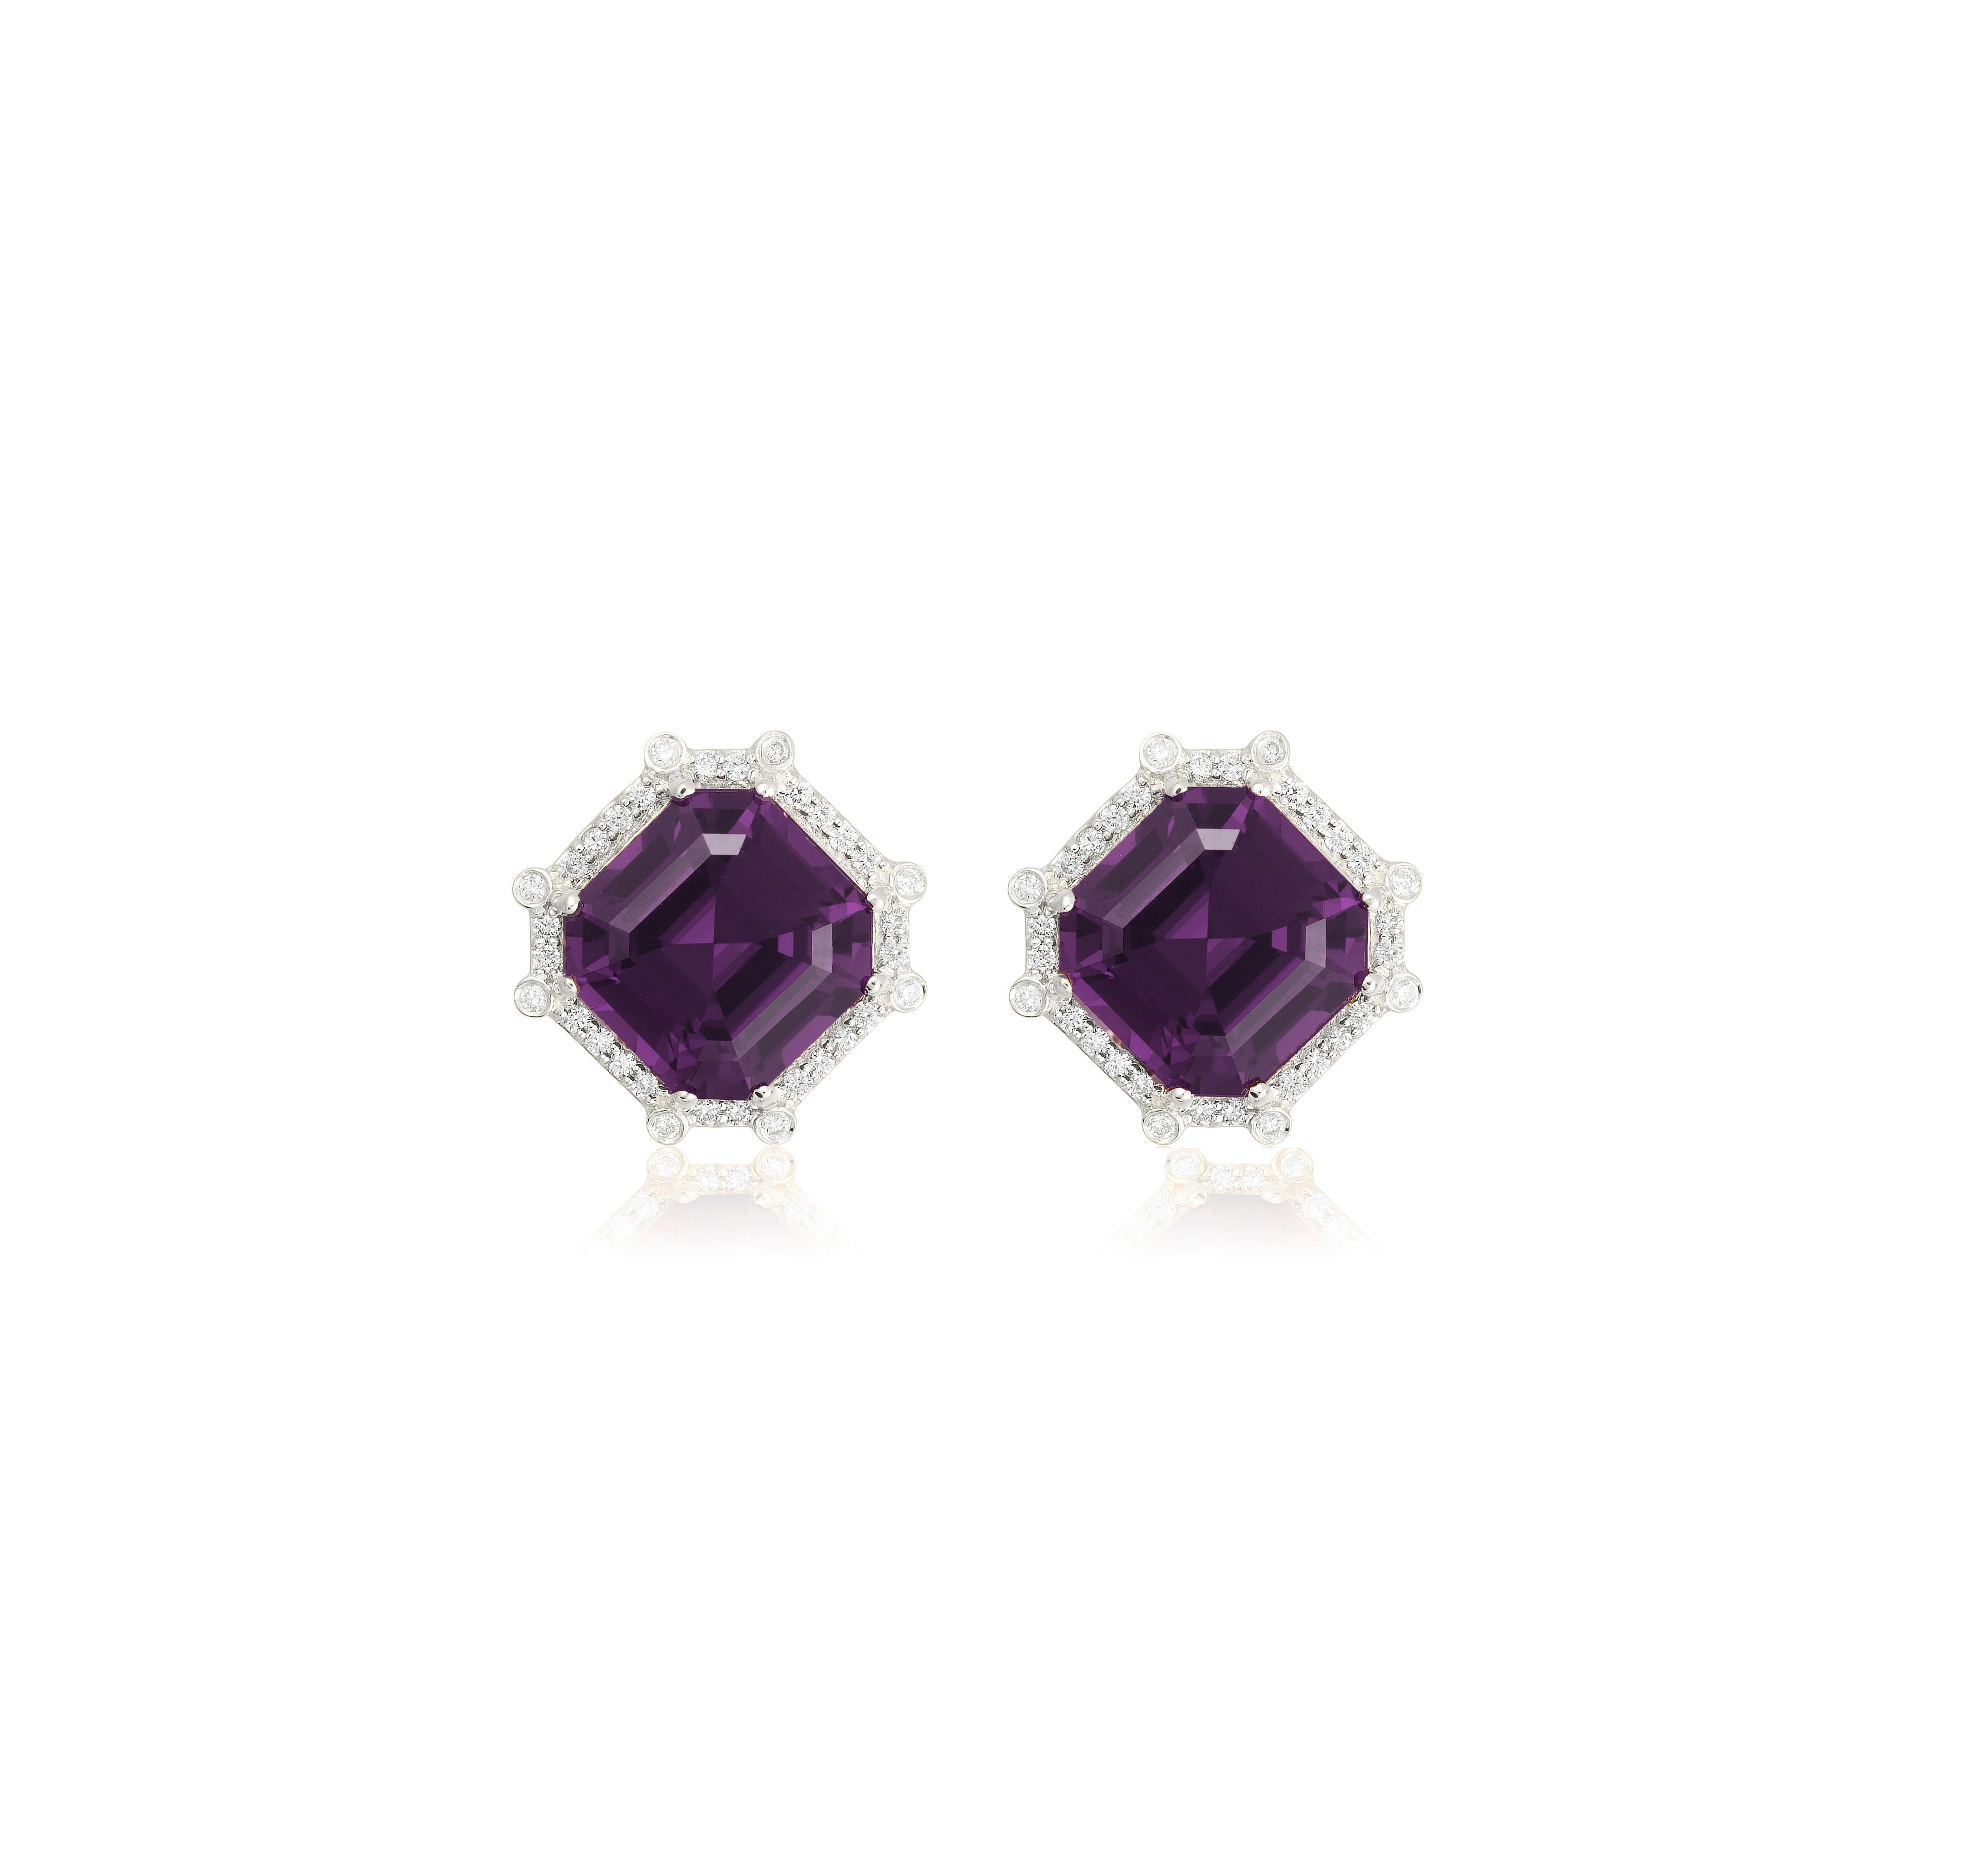 Amethyst & Diamond Octagon Studs in 18K White Gold from 'Gossip' Collection. Please allow 4-5 weeks for this item to be delivered.

Stone Size: 9 x 9 mm

Diamonds: G-H / VS, Approx Wt : 0.23 Cts